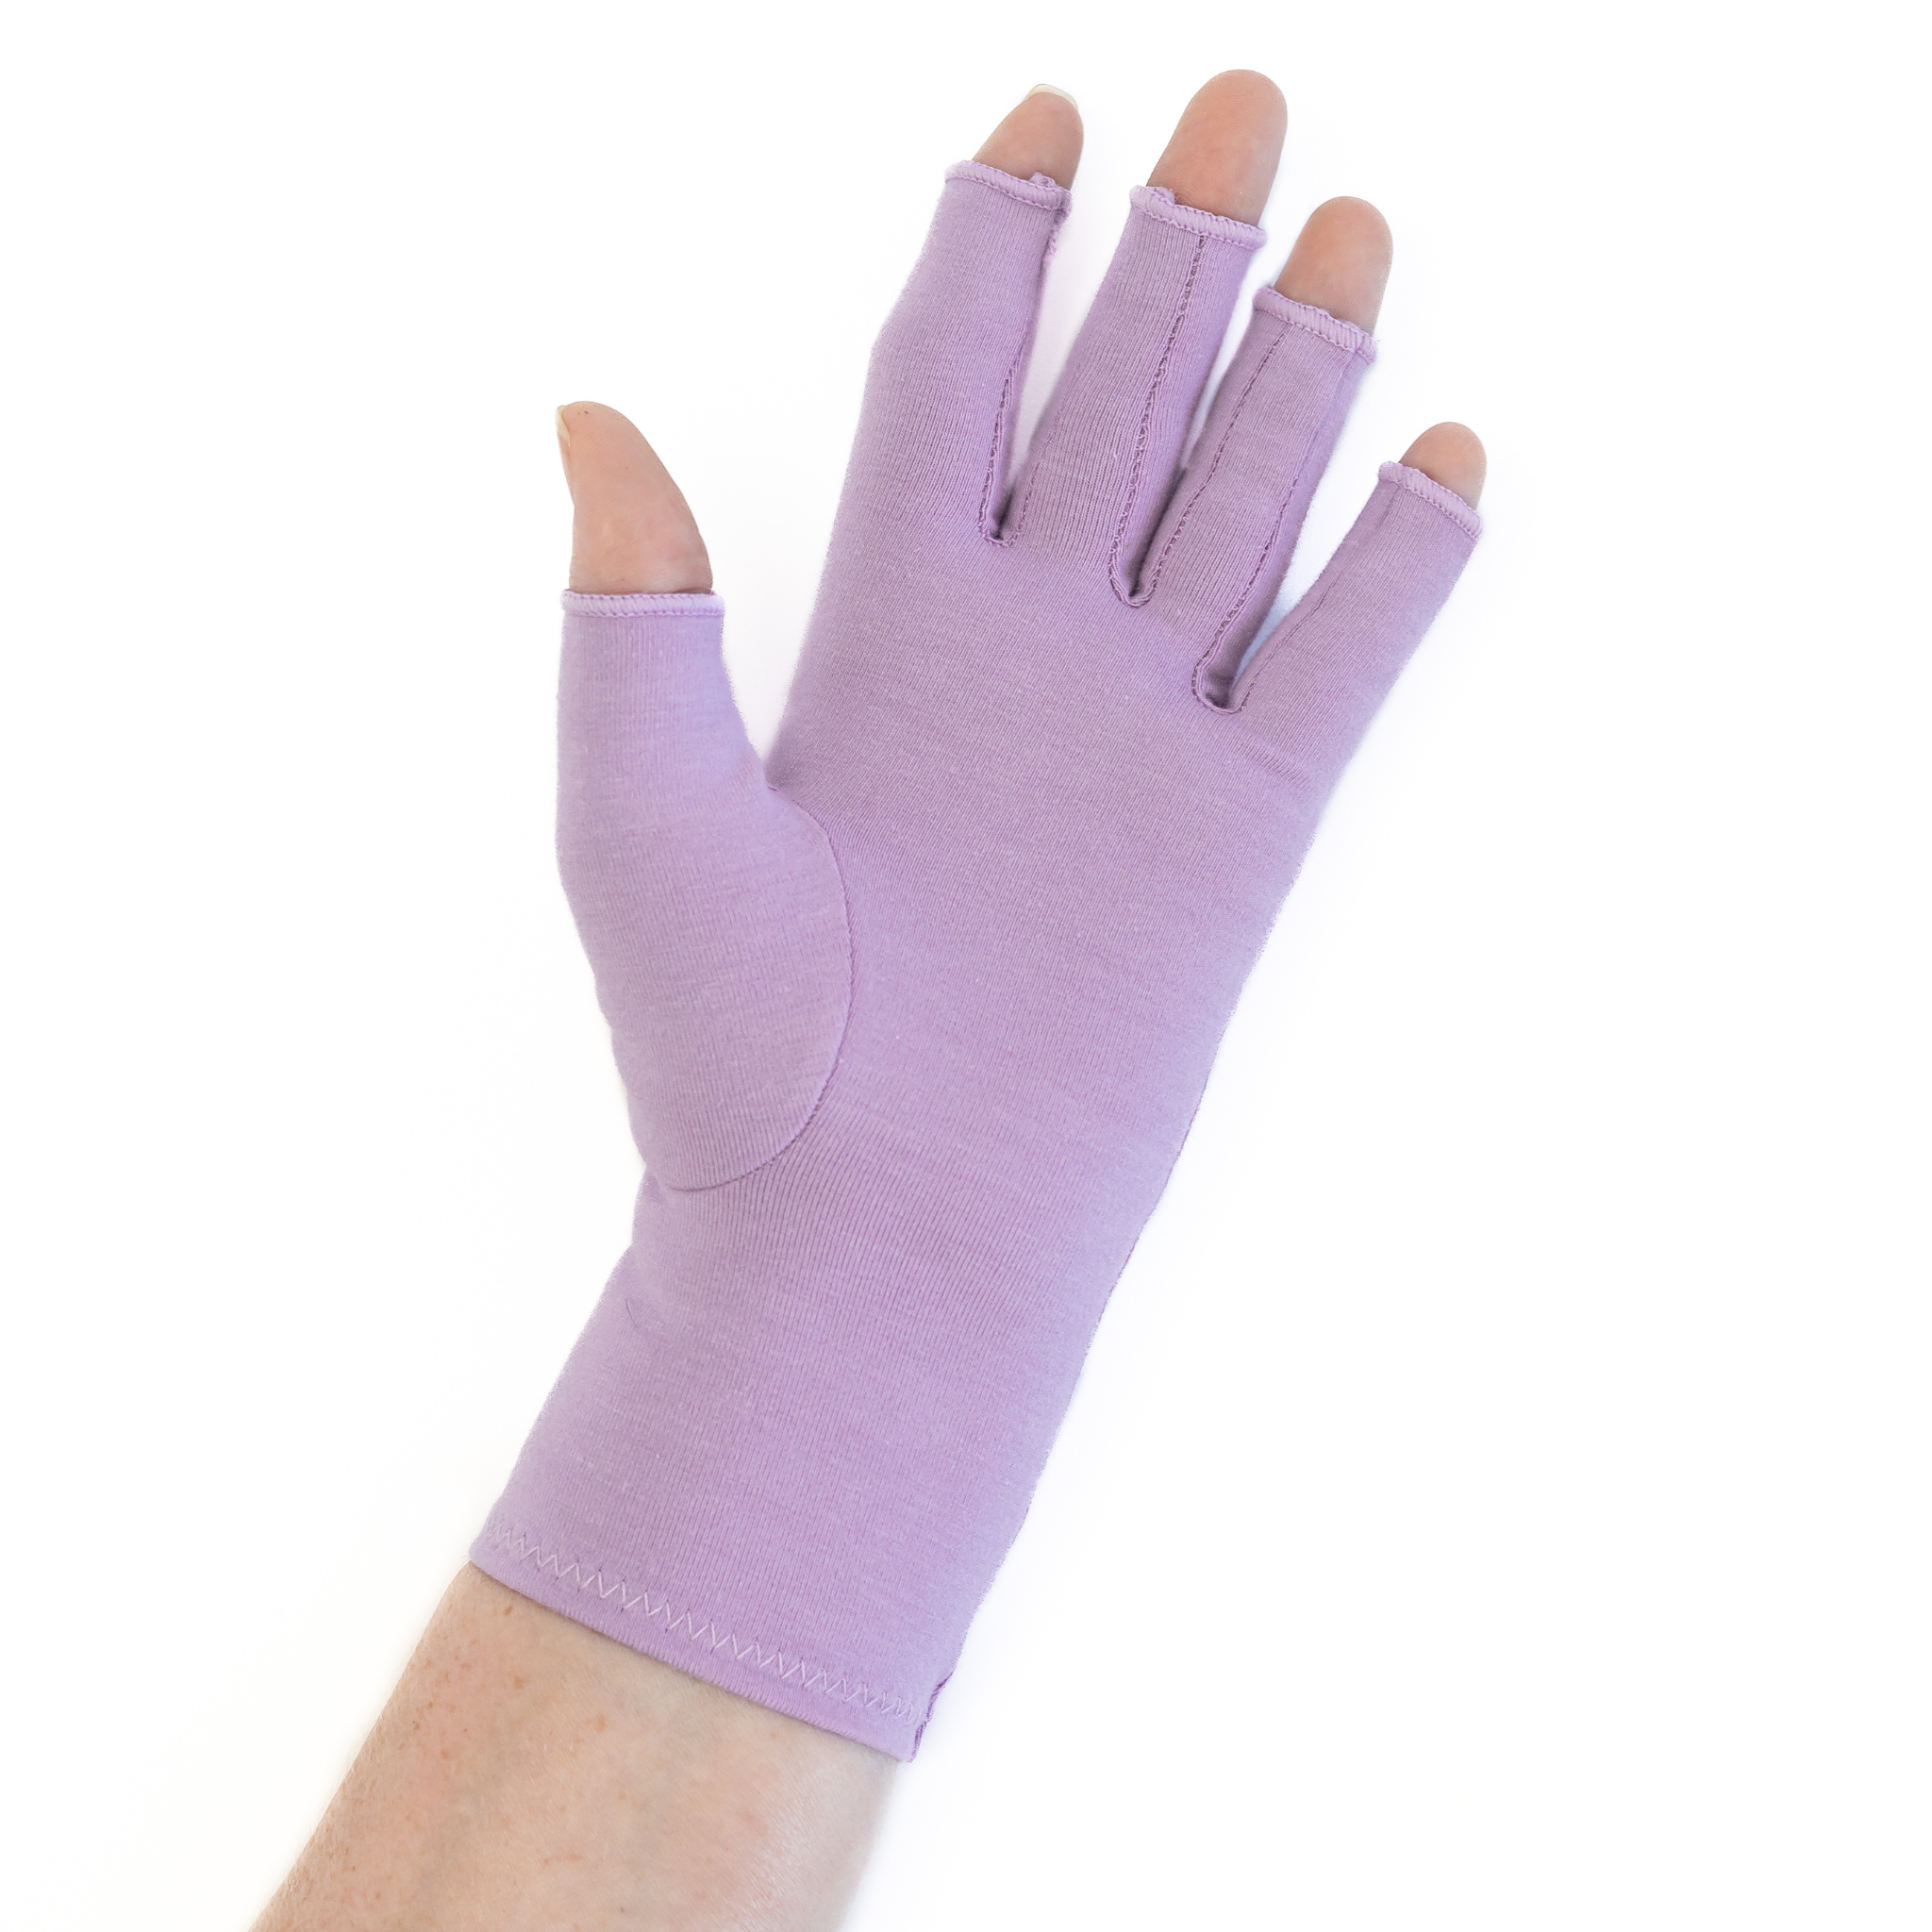 A close up of the hand of a woman with arthritis, wearing Dusky Lilac Compression Gloves and showing the palm of her hand.